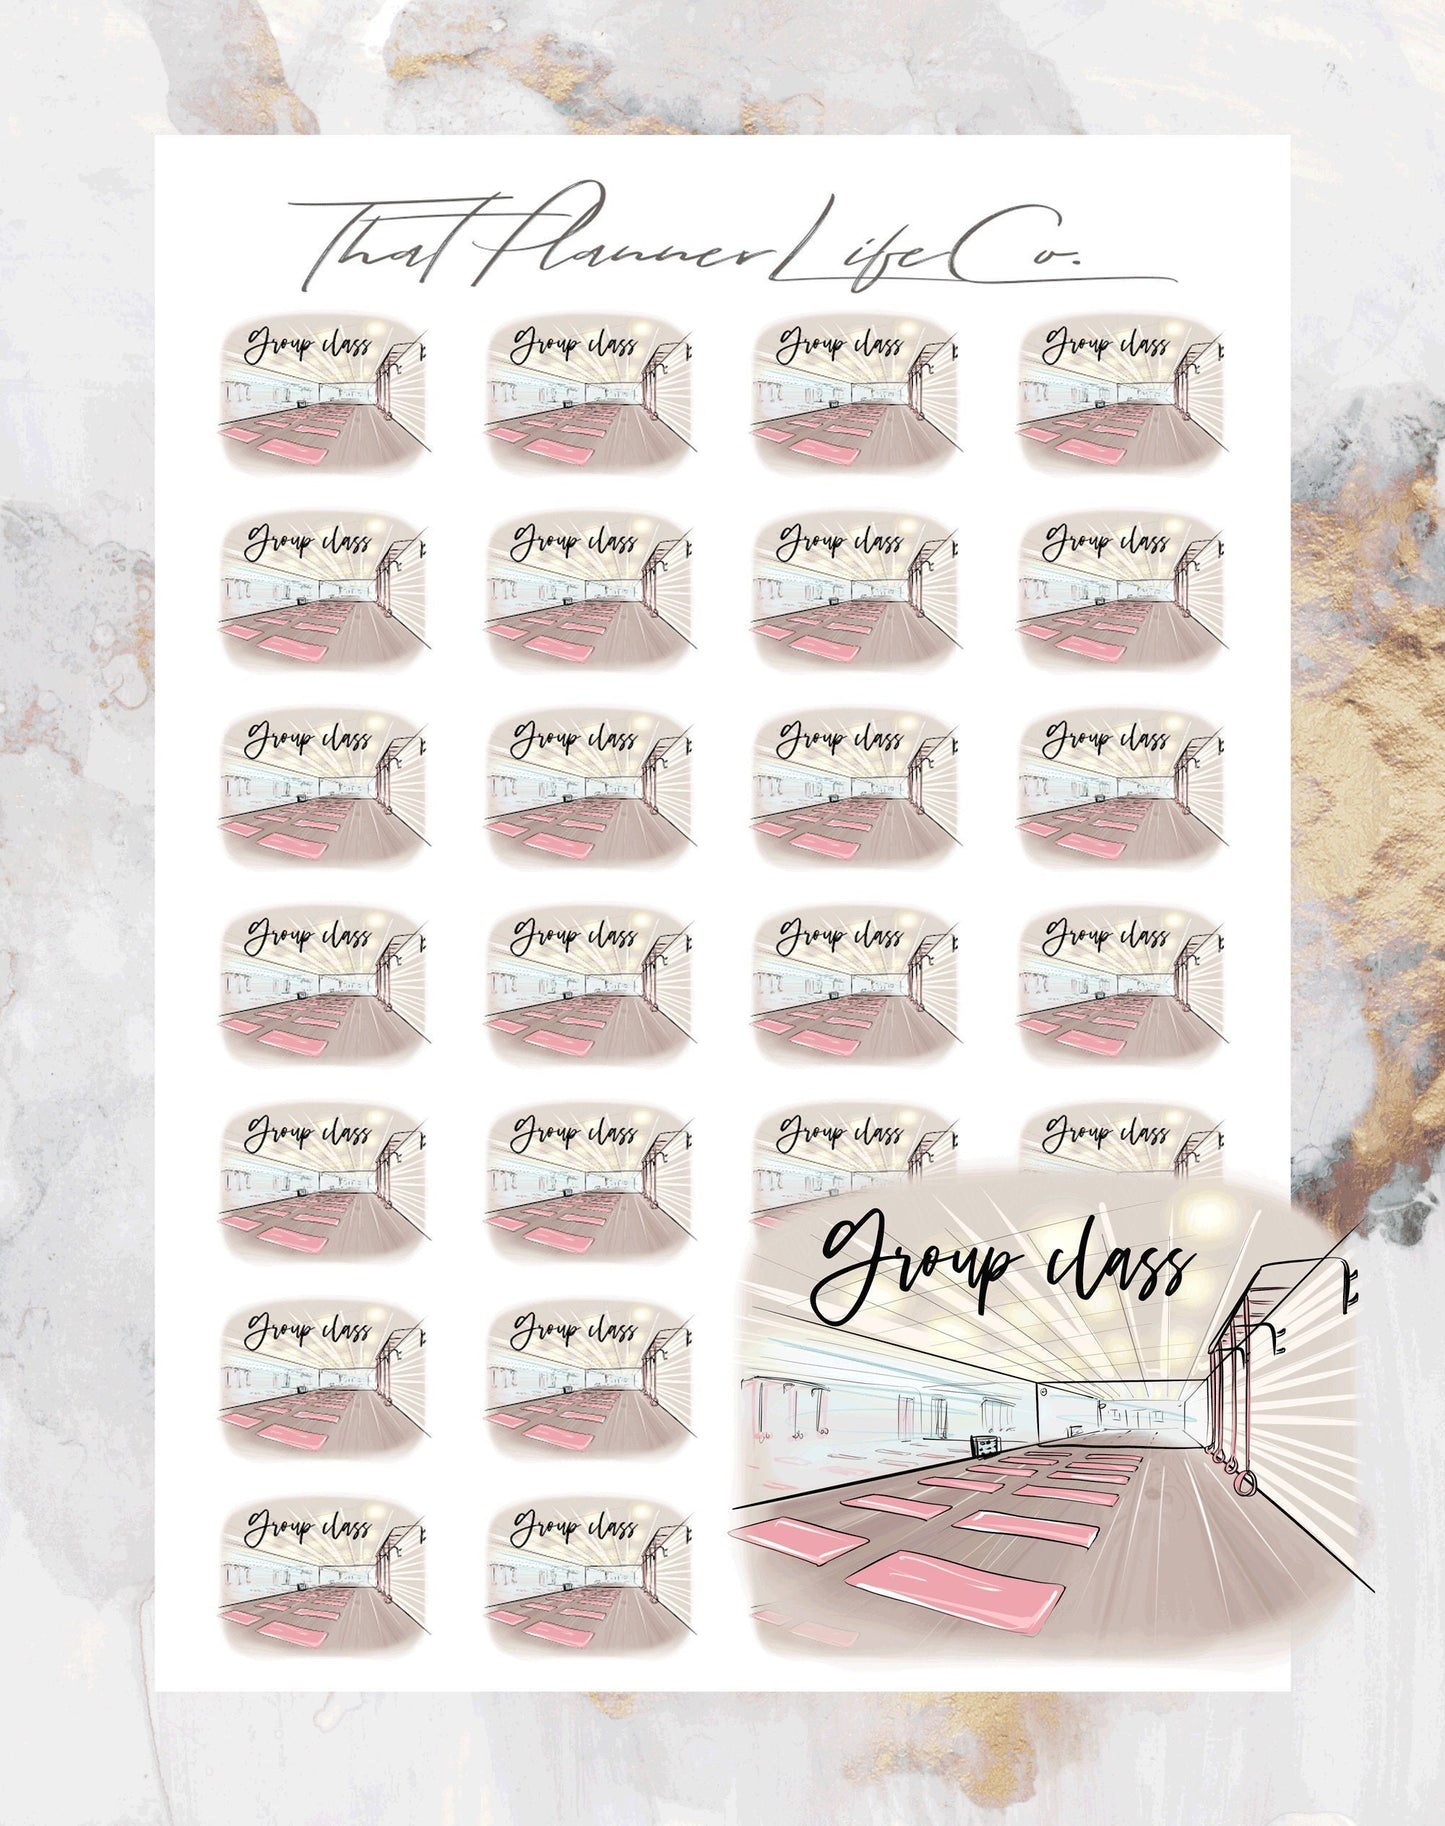 Group Class Workout Icon Stickers, Planner Stickers, Erin Condren